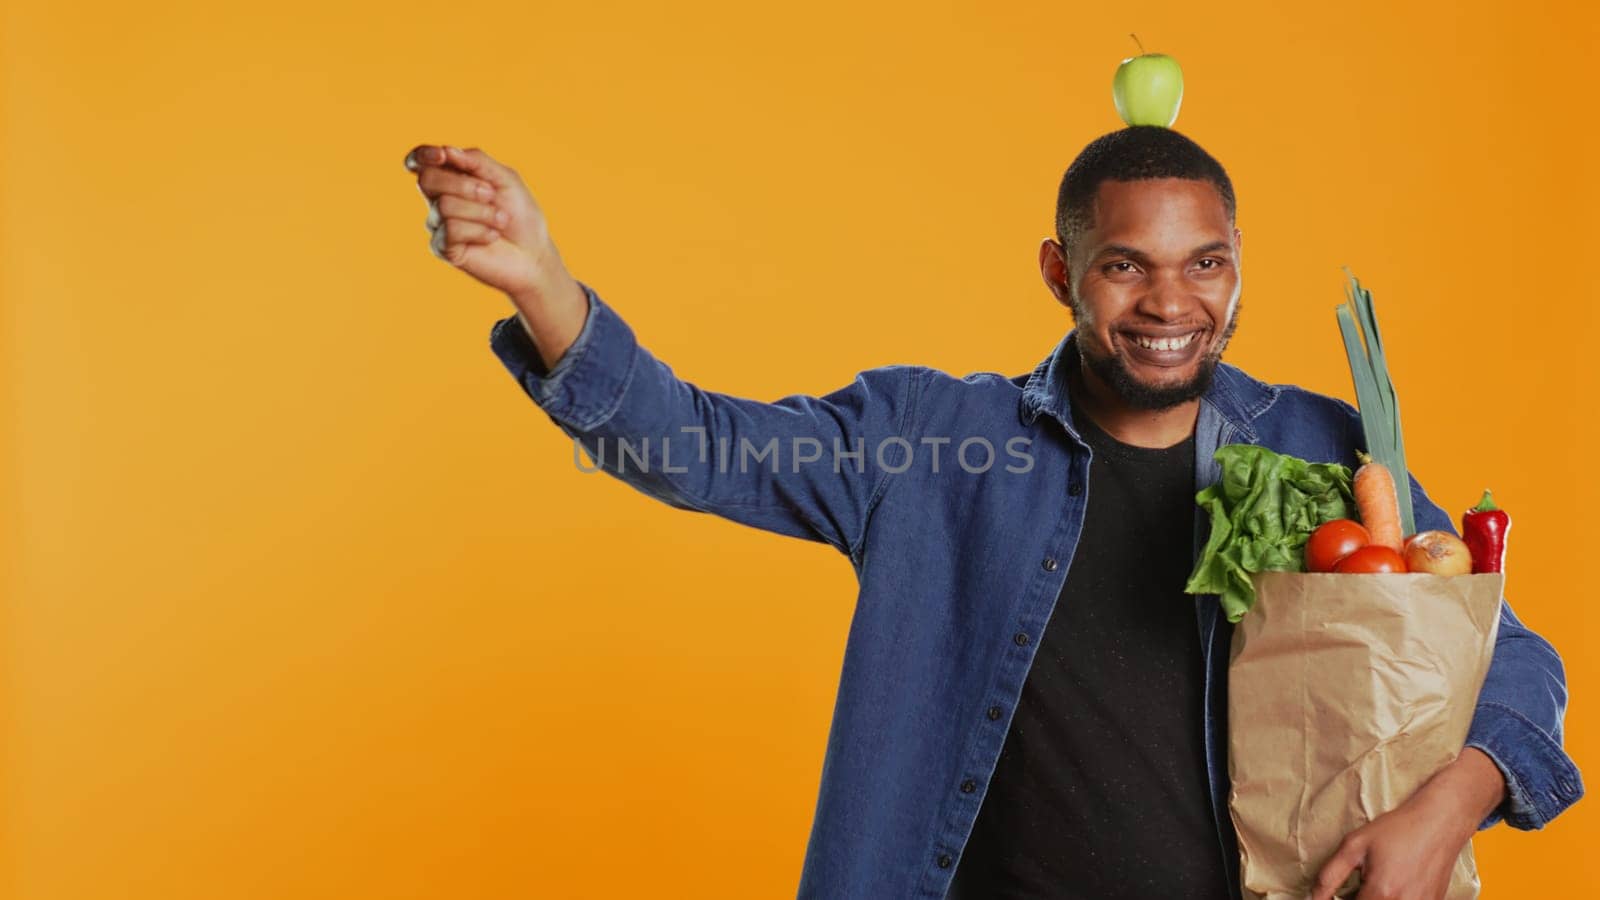 Playful vegan guy dancing with an apple placed on his head, having fun trying to be balanced and not drop it. Confident happy man recommending homegrown local fresh produce. Camera B.